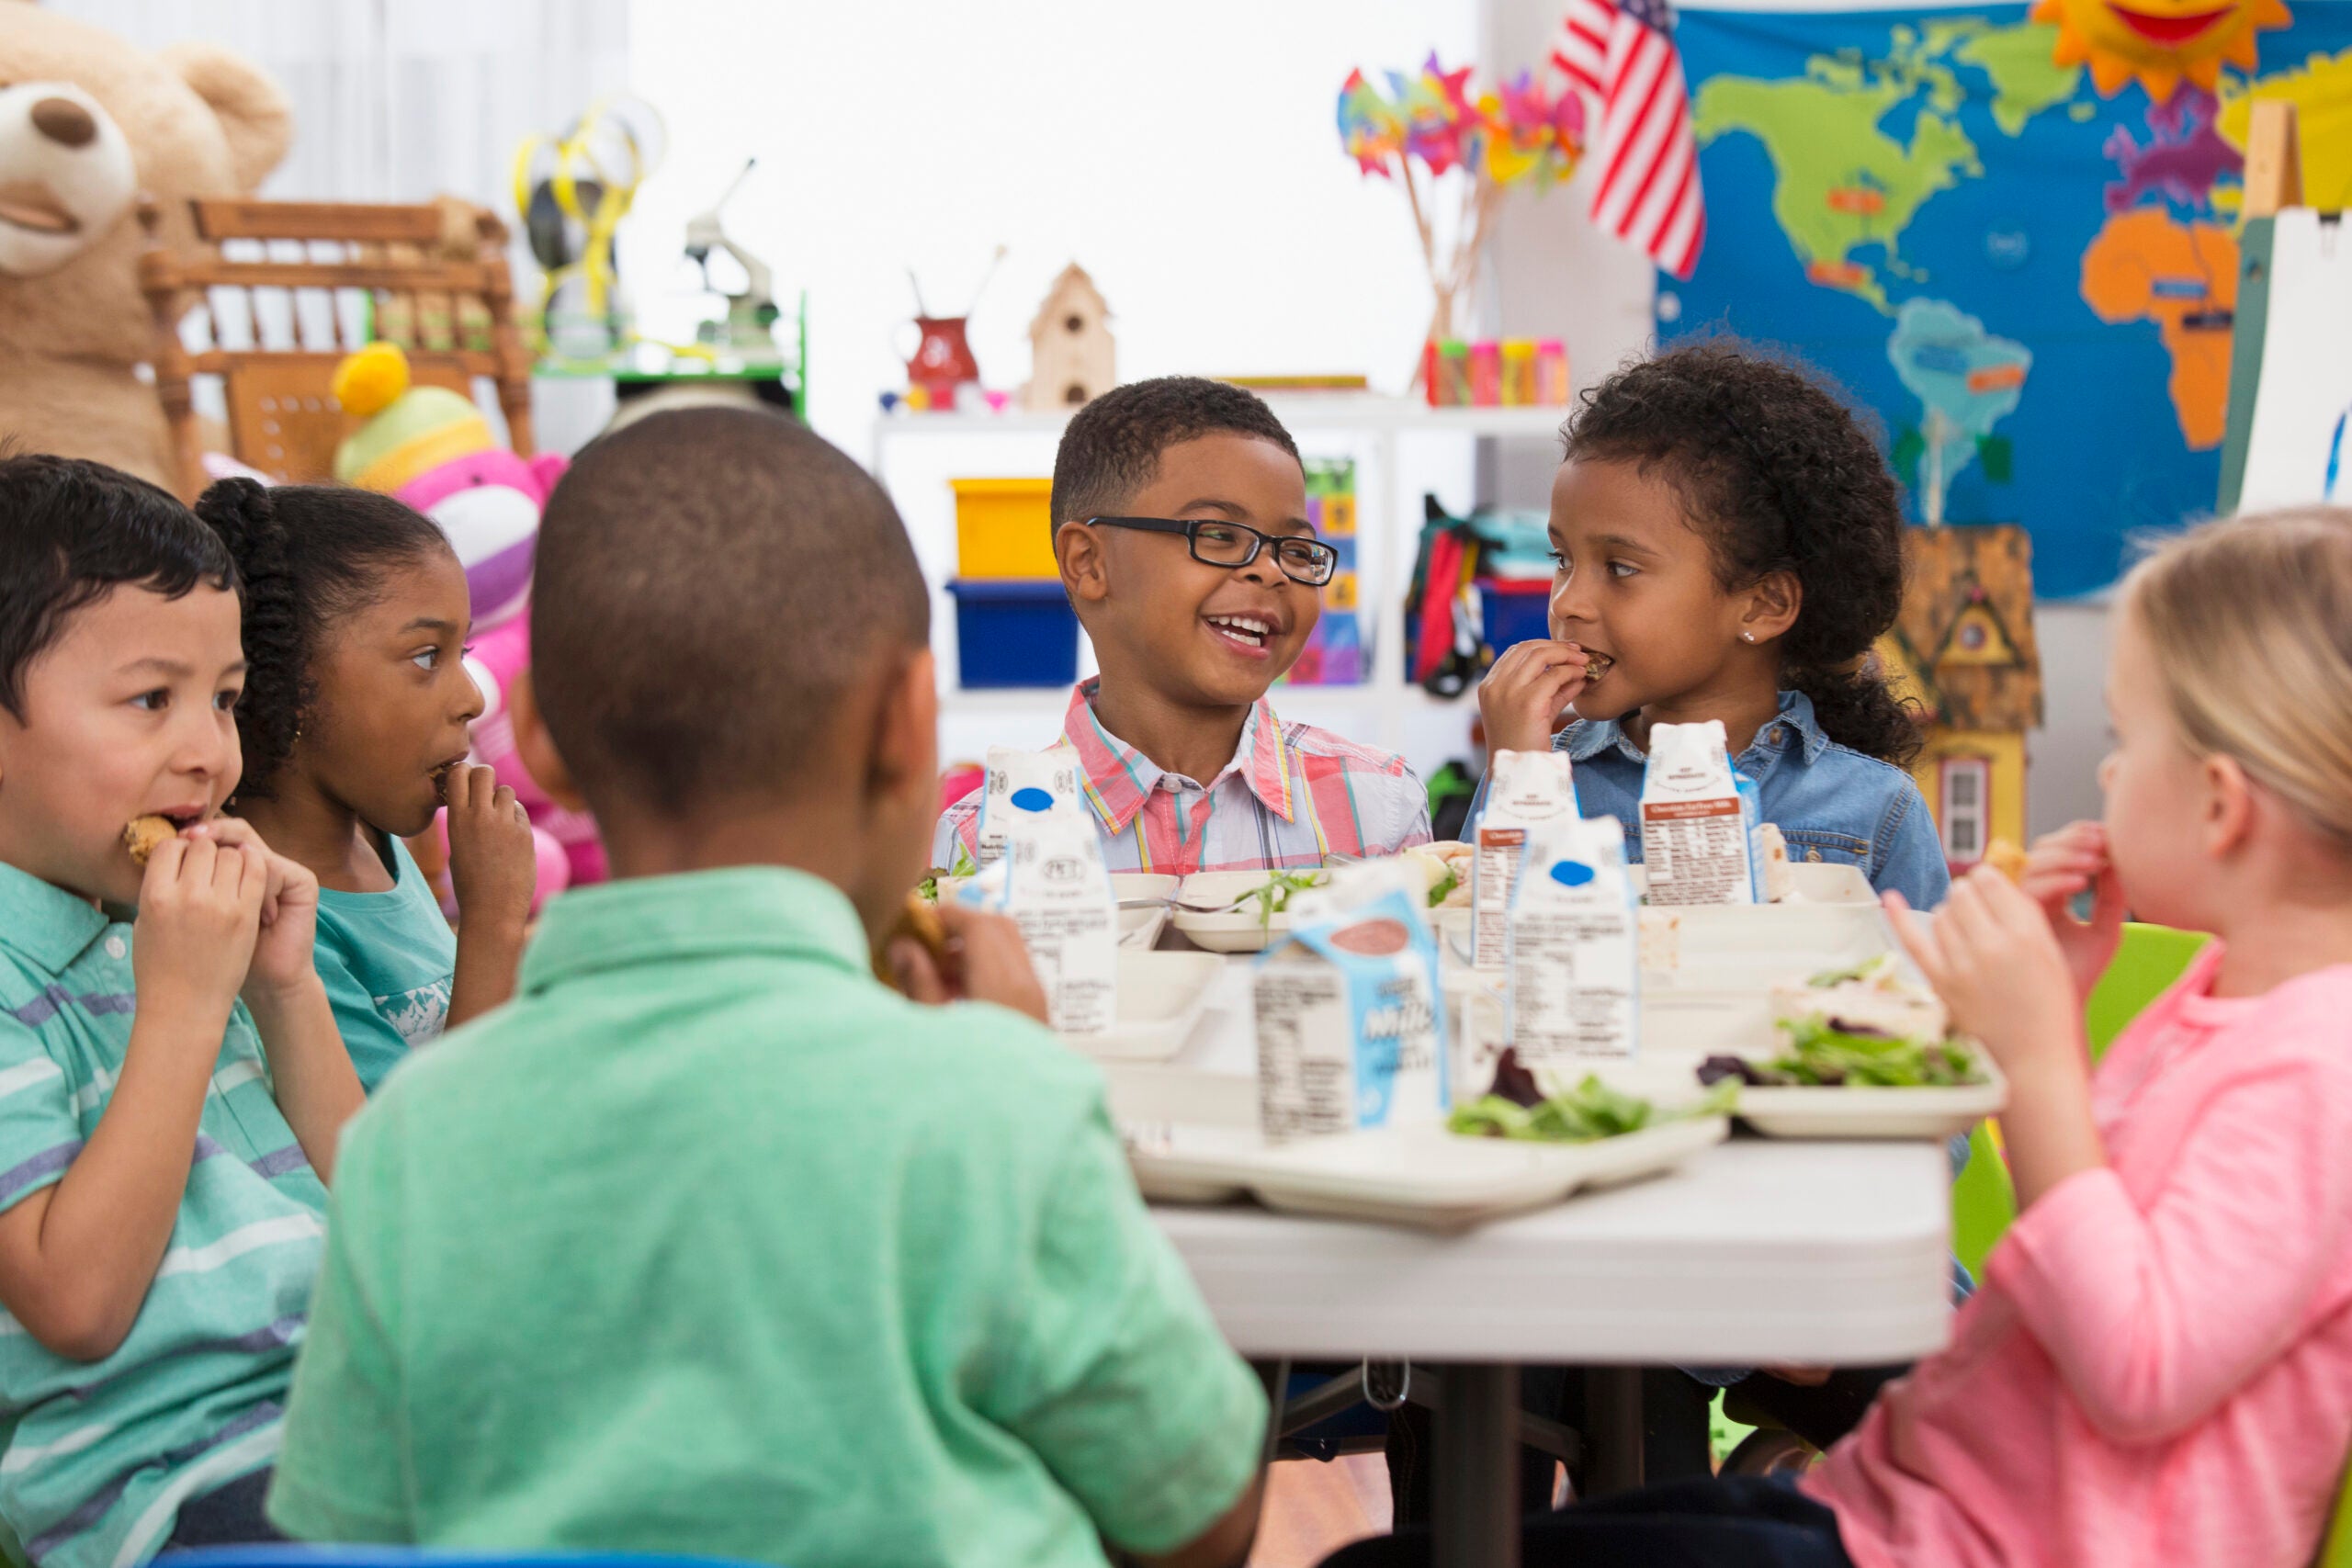 The attempted rollback conflicted both with extensive nutrition science and with the government’s own recommendations for a healthy diet. In 2012, USDA issued strong nutrition standards for school meals that required a gradual decrease in sodium content and an increase in whole grains, protecting children from serious health problems, including heart disease and diabetes.
(Getty Images | Ariel Skelley)